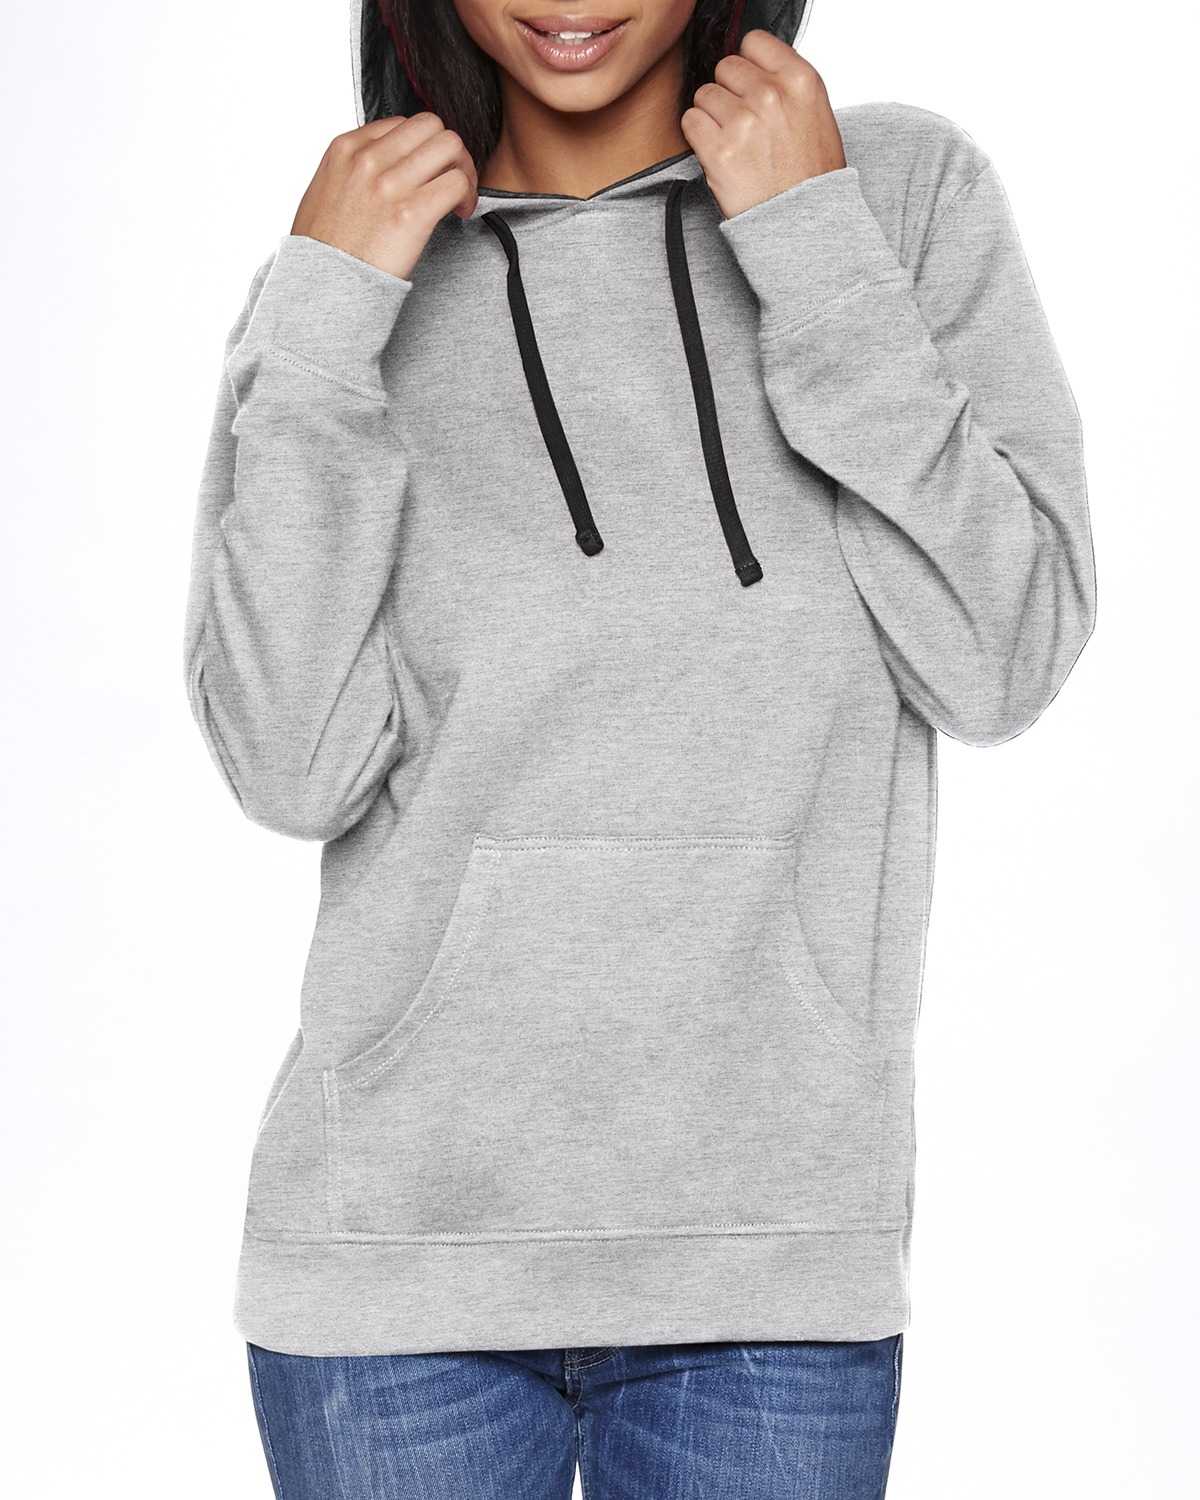 Next Level 9301 Adult French Terry Pullover Hoody | ApparelChoice.com